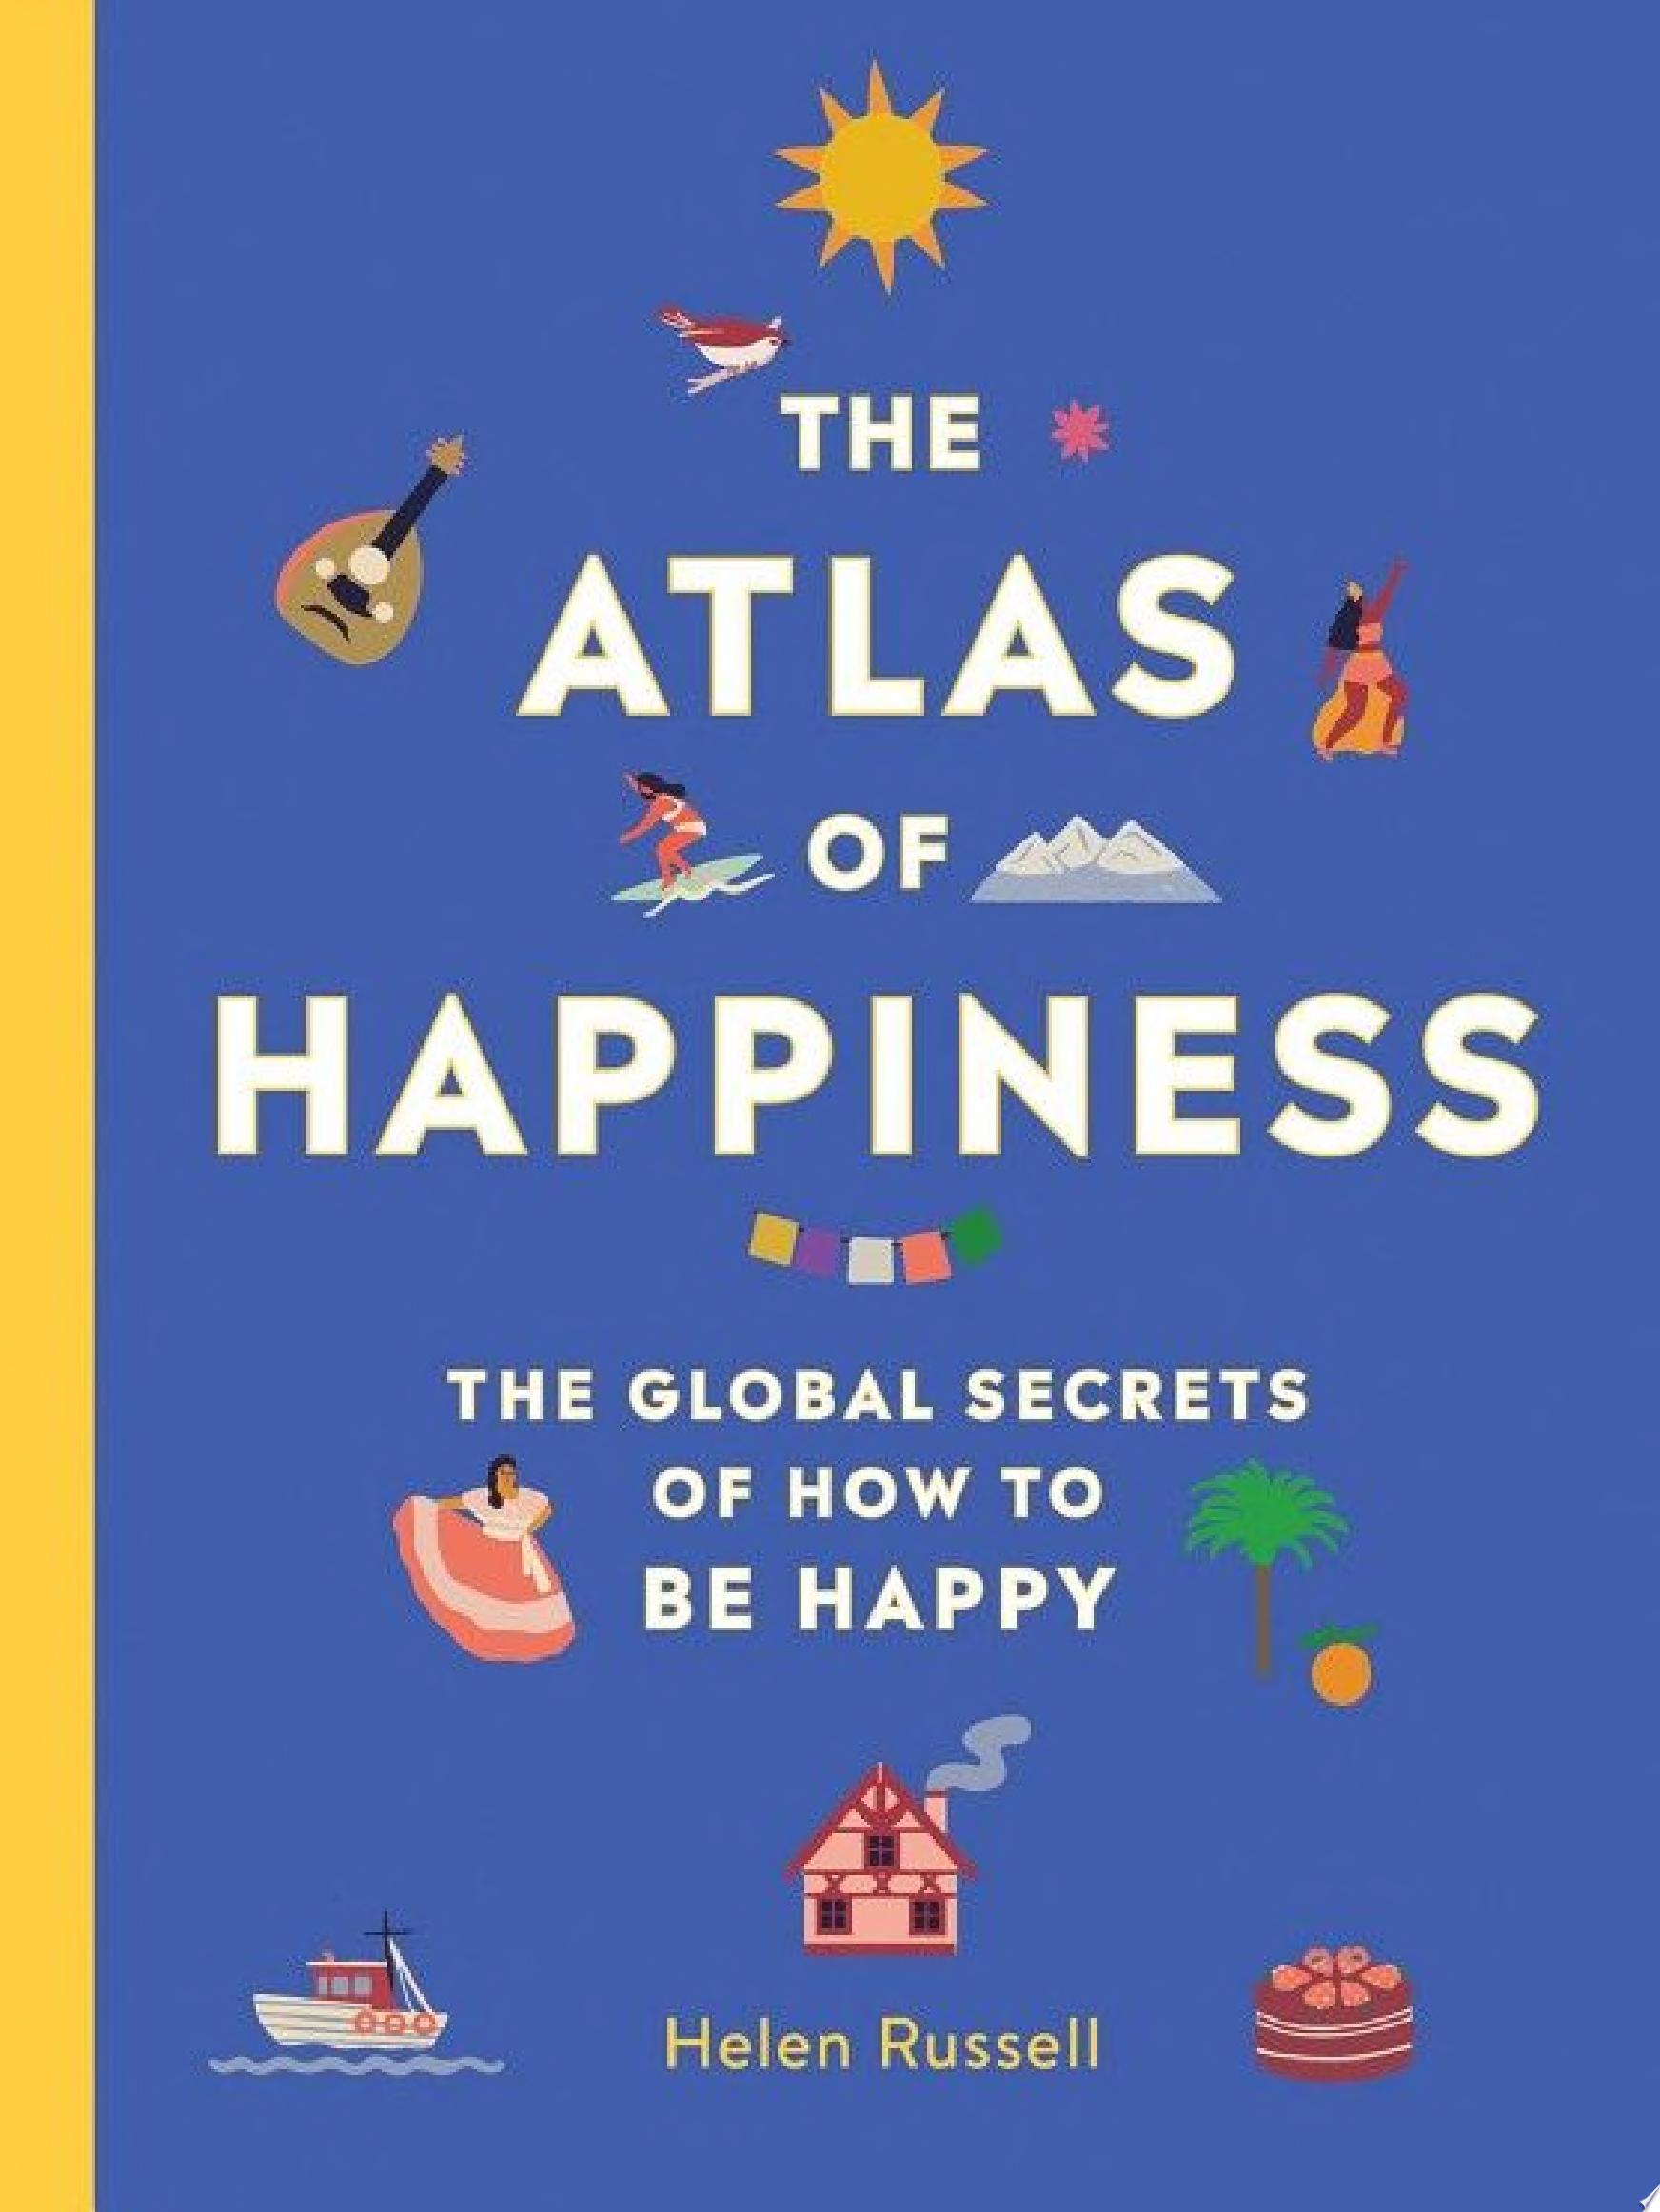 Image for "The Atlas of Happiness"